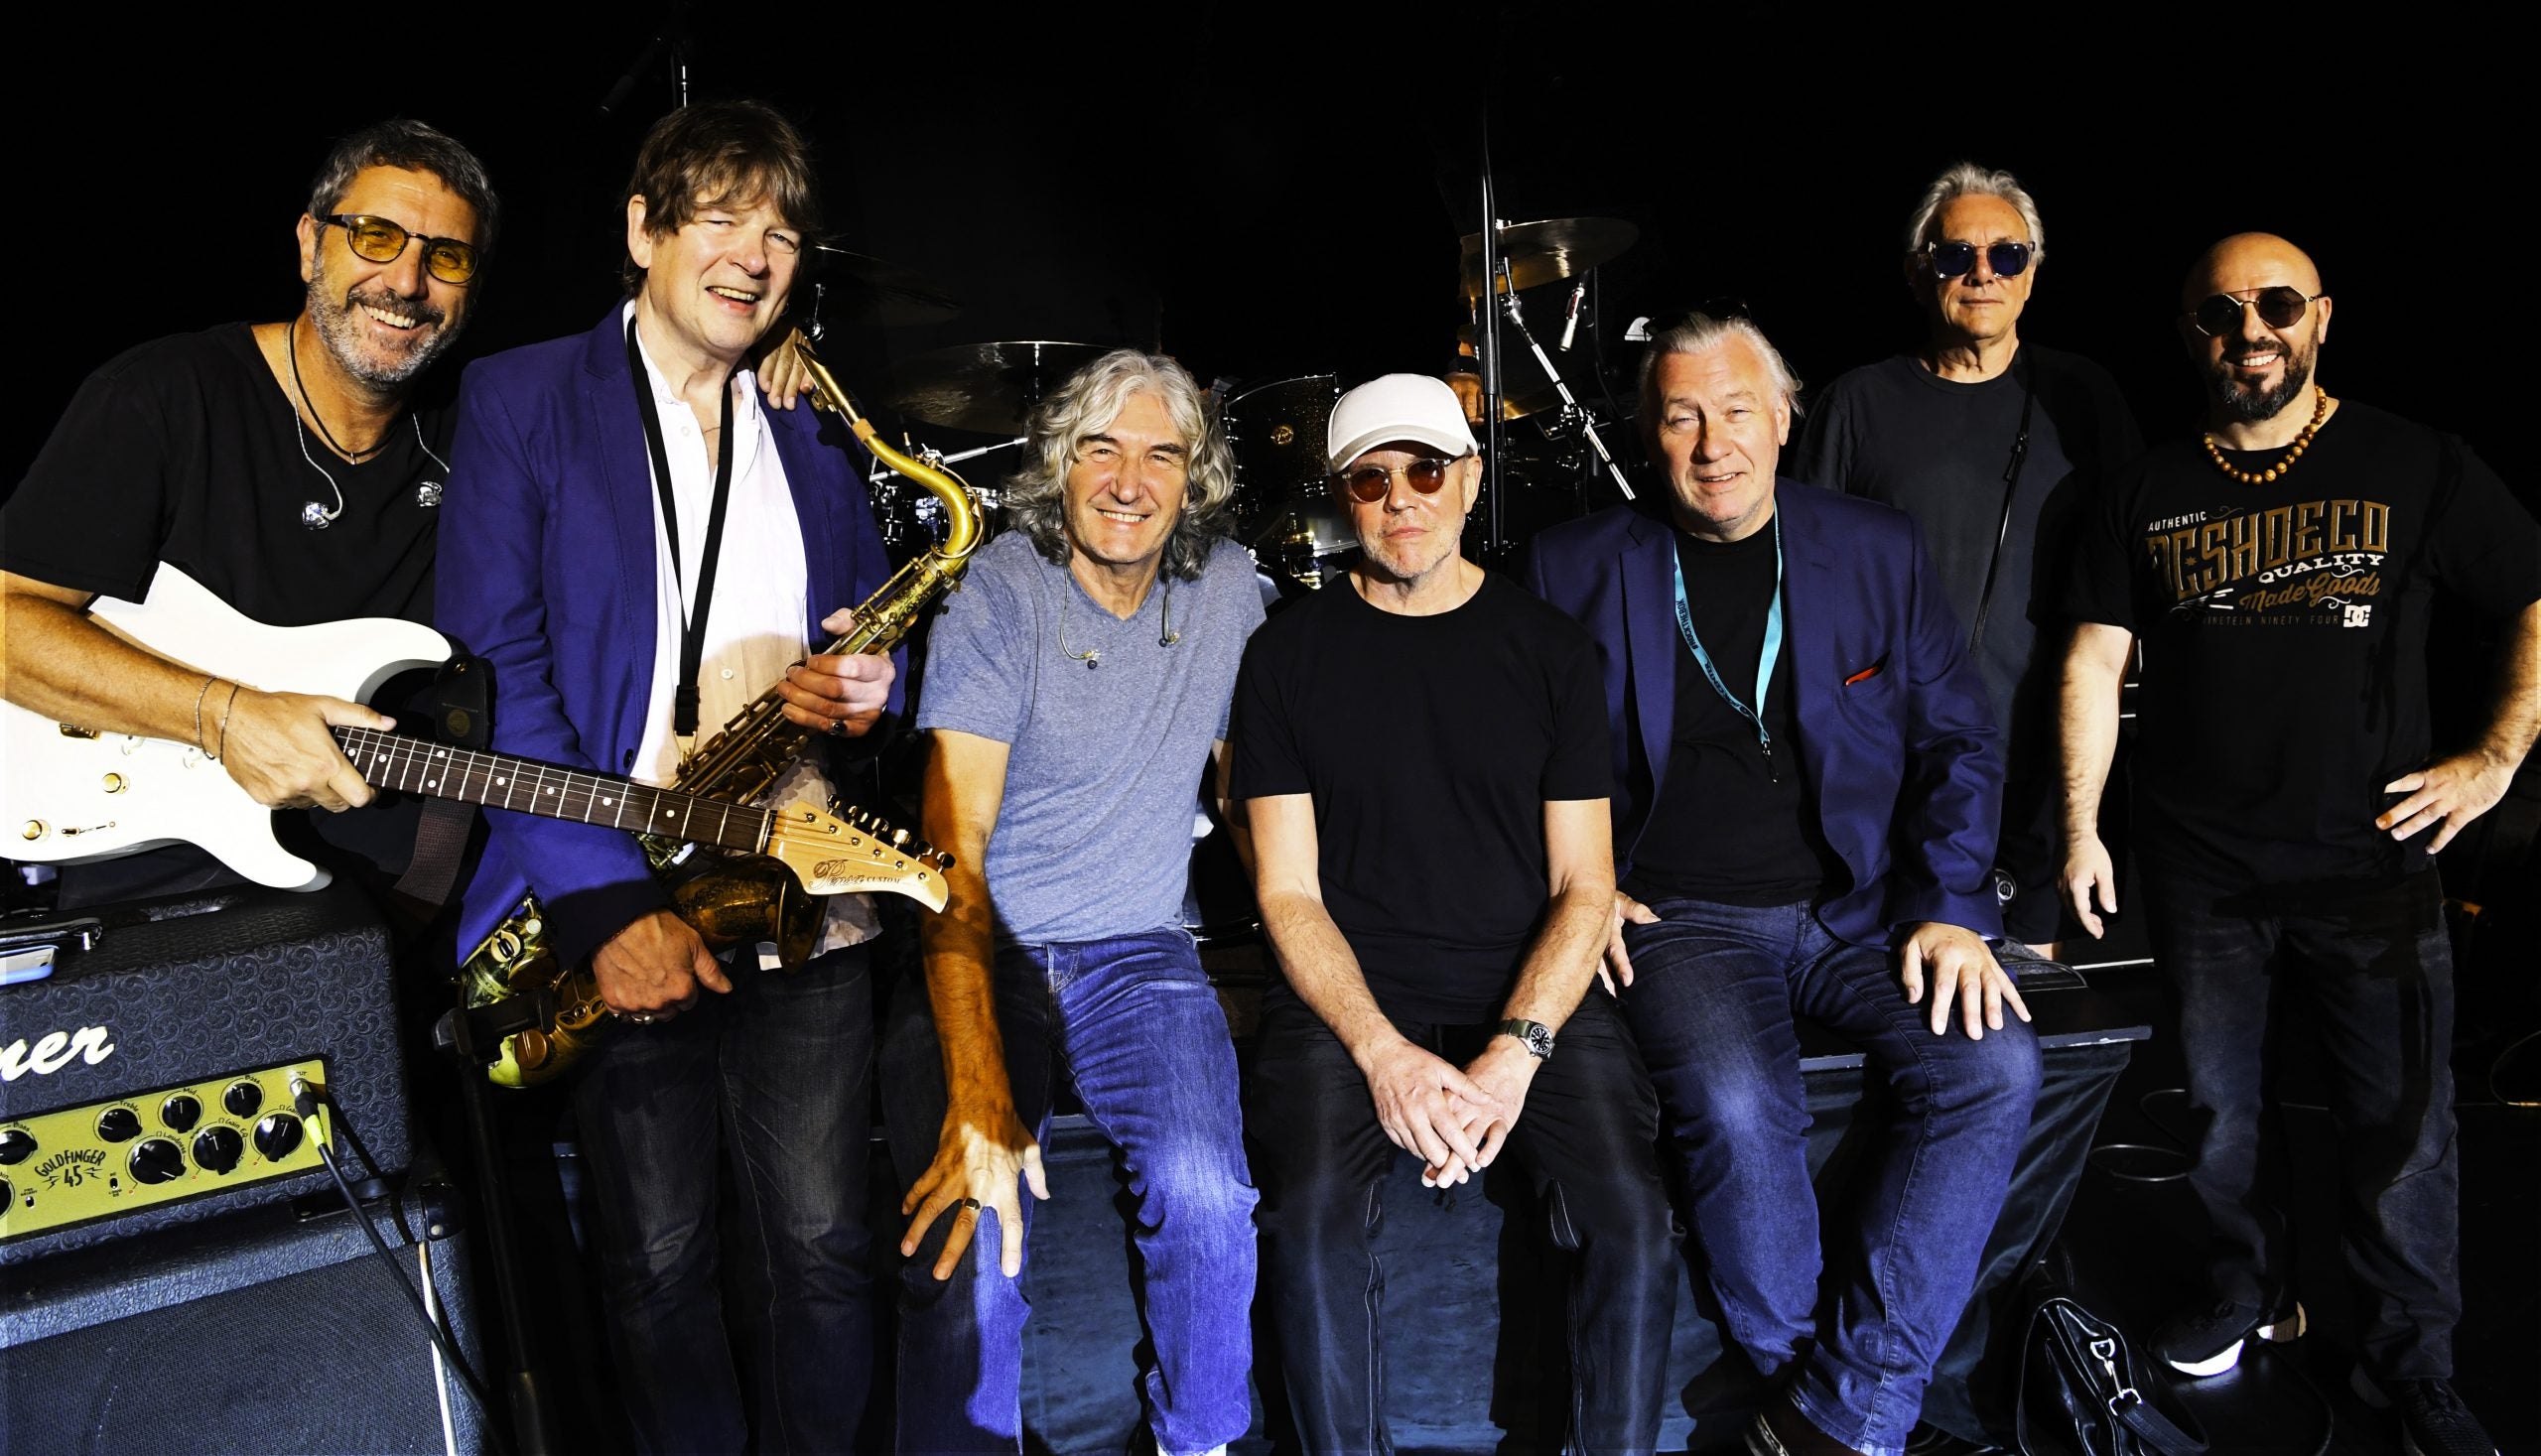 Dsl* Dire Straits Legacy - Tour 2023 presale code for show tickets in New York, NY (Town Hall)